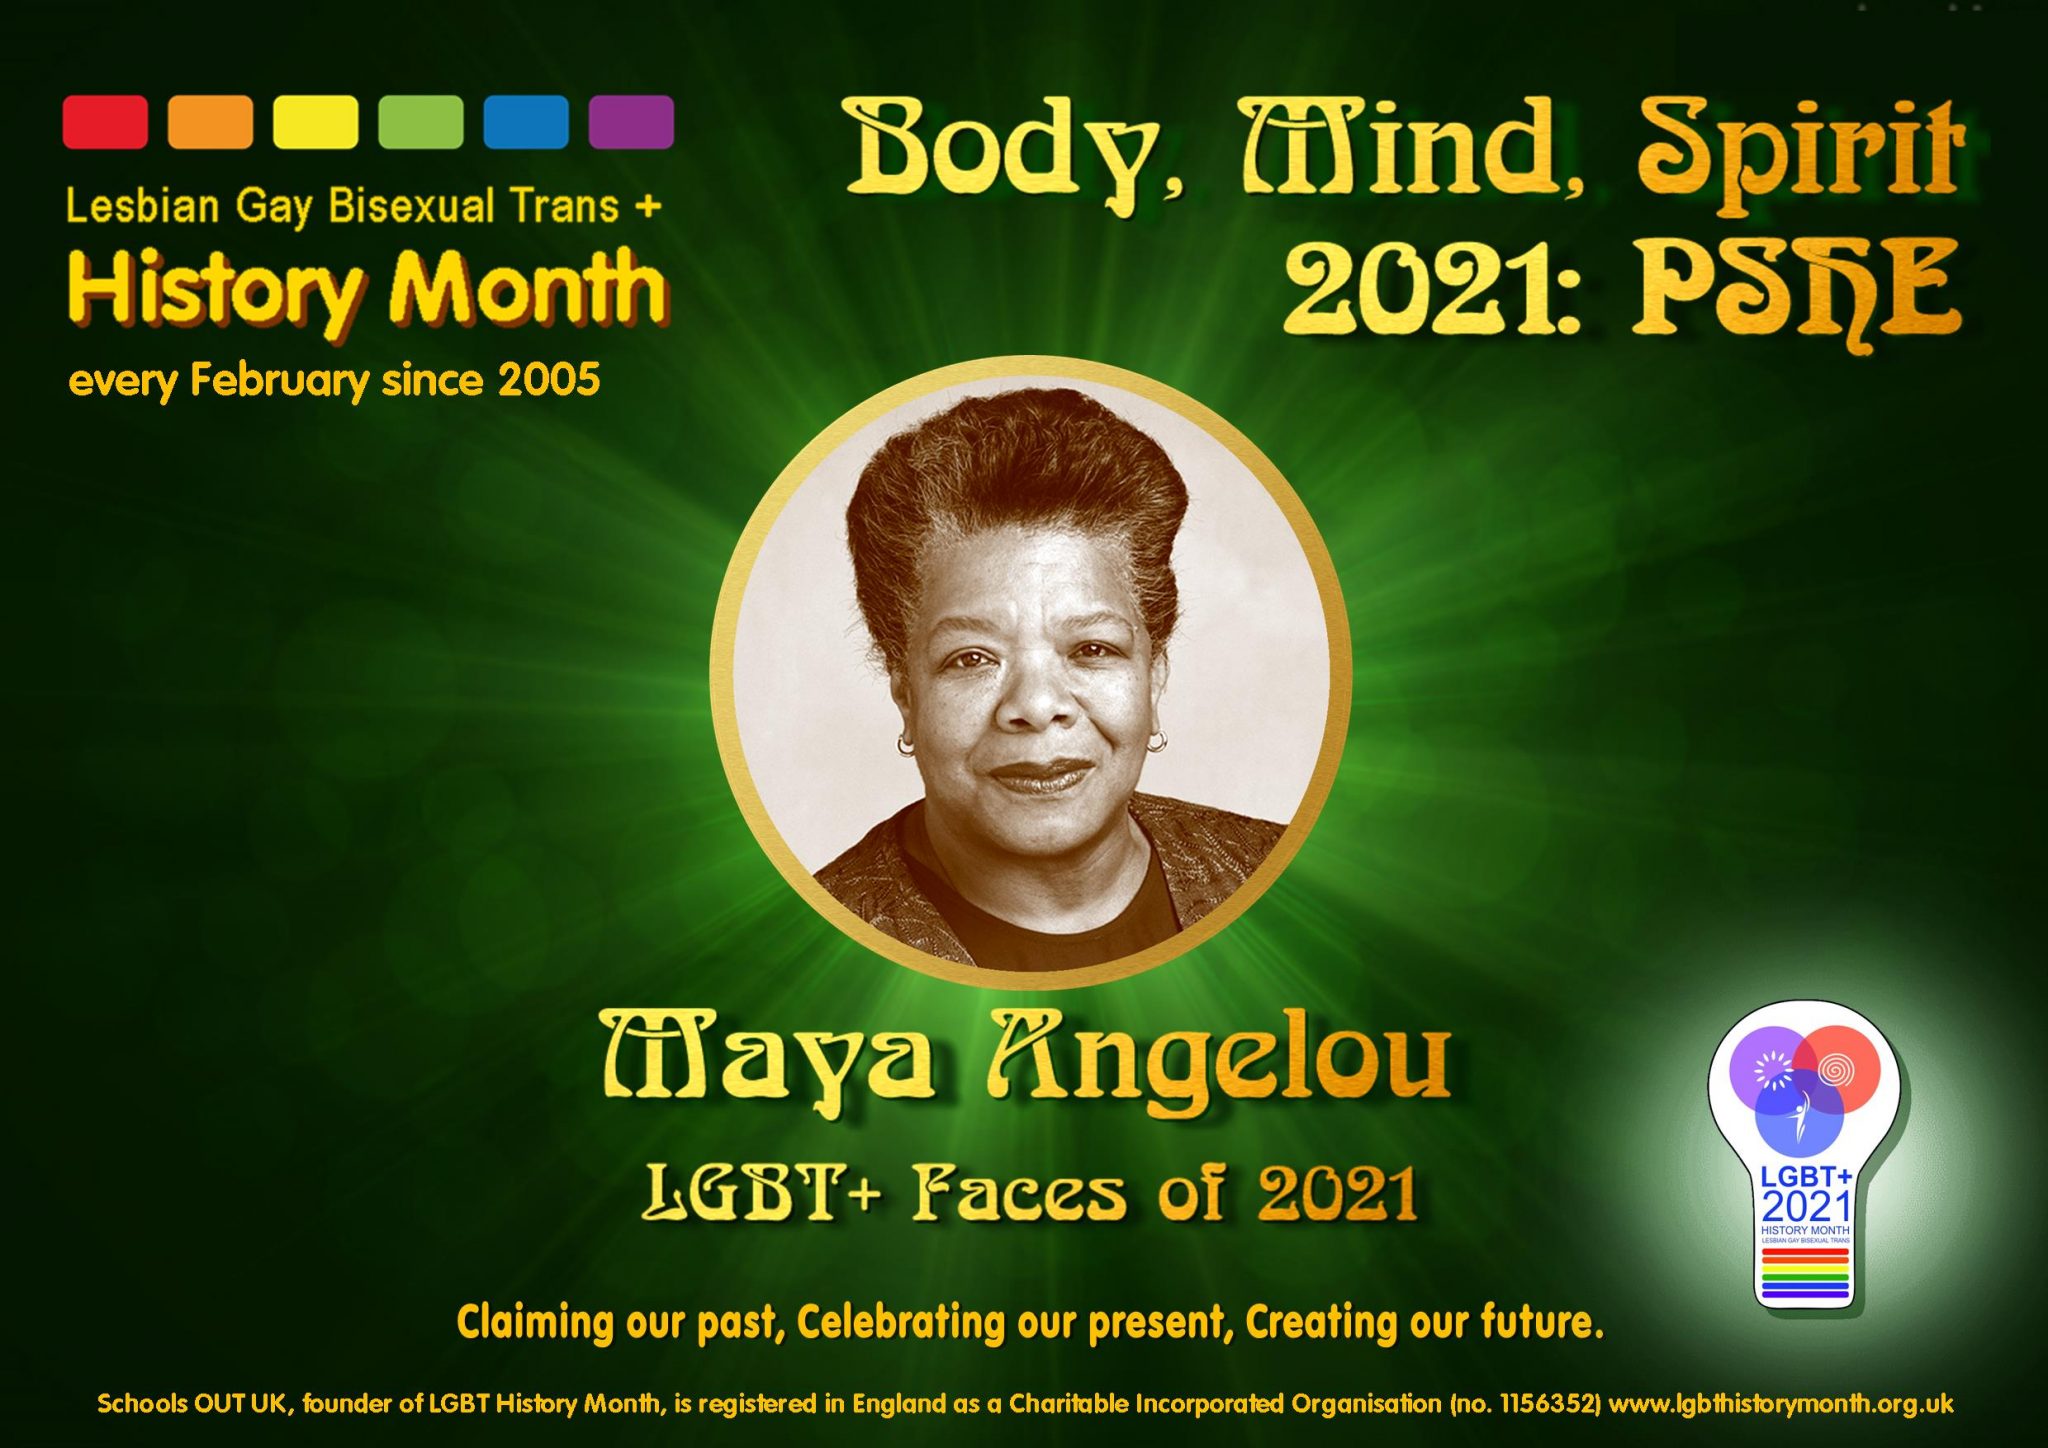 Maya Angelou a voice for the voiceless